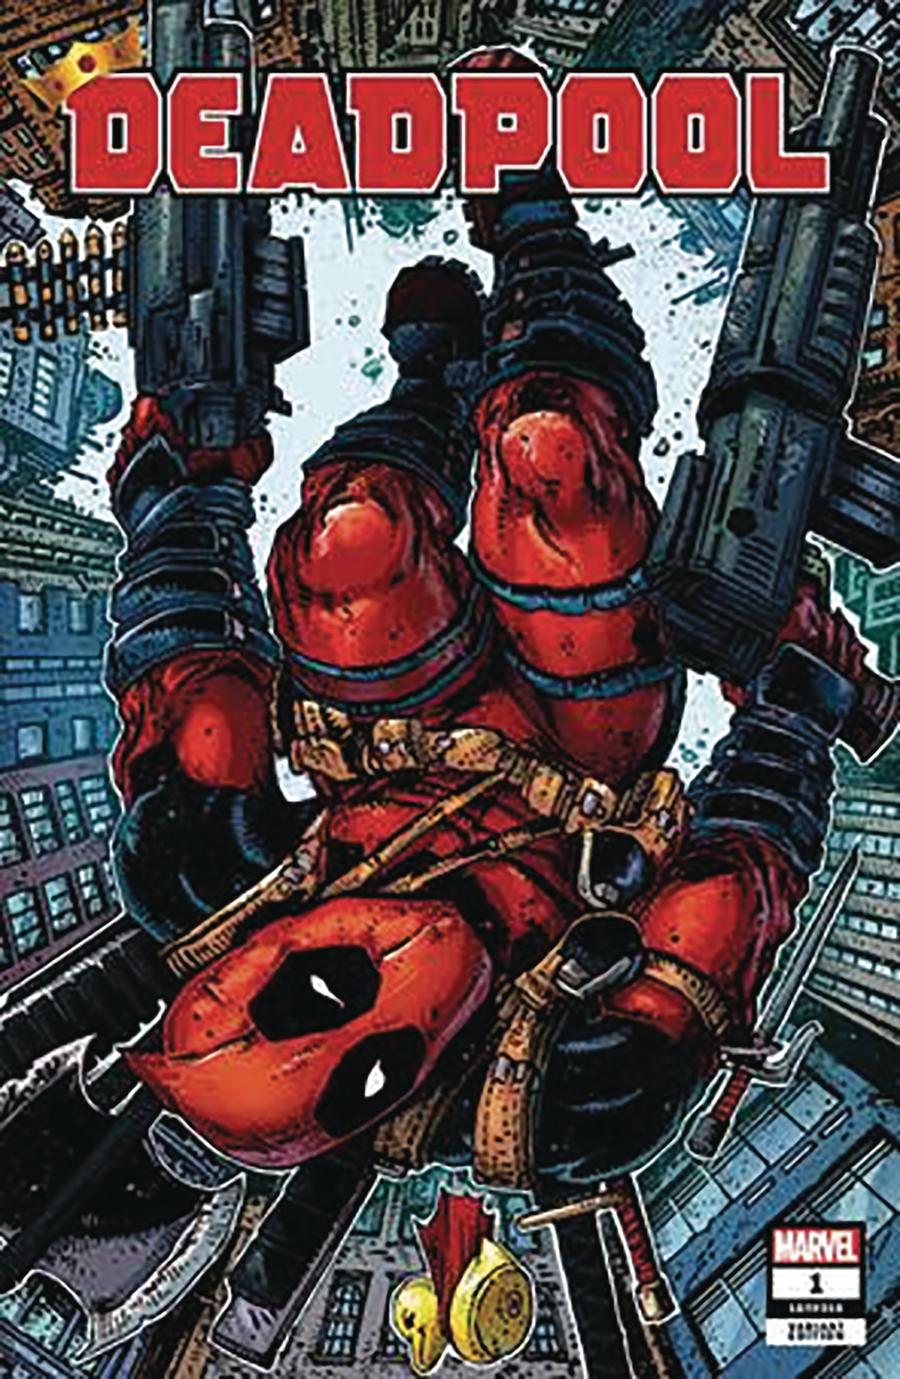 Deadpool Vol 7 #1 Cover K Clover Press Exclusive Kevin Eastman Variant Cover